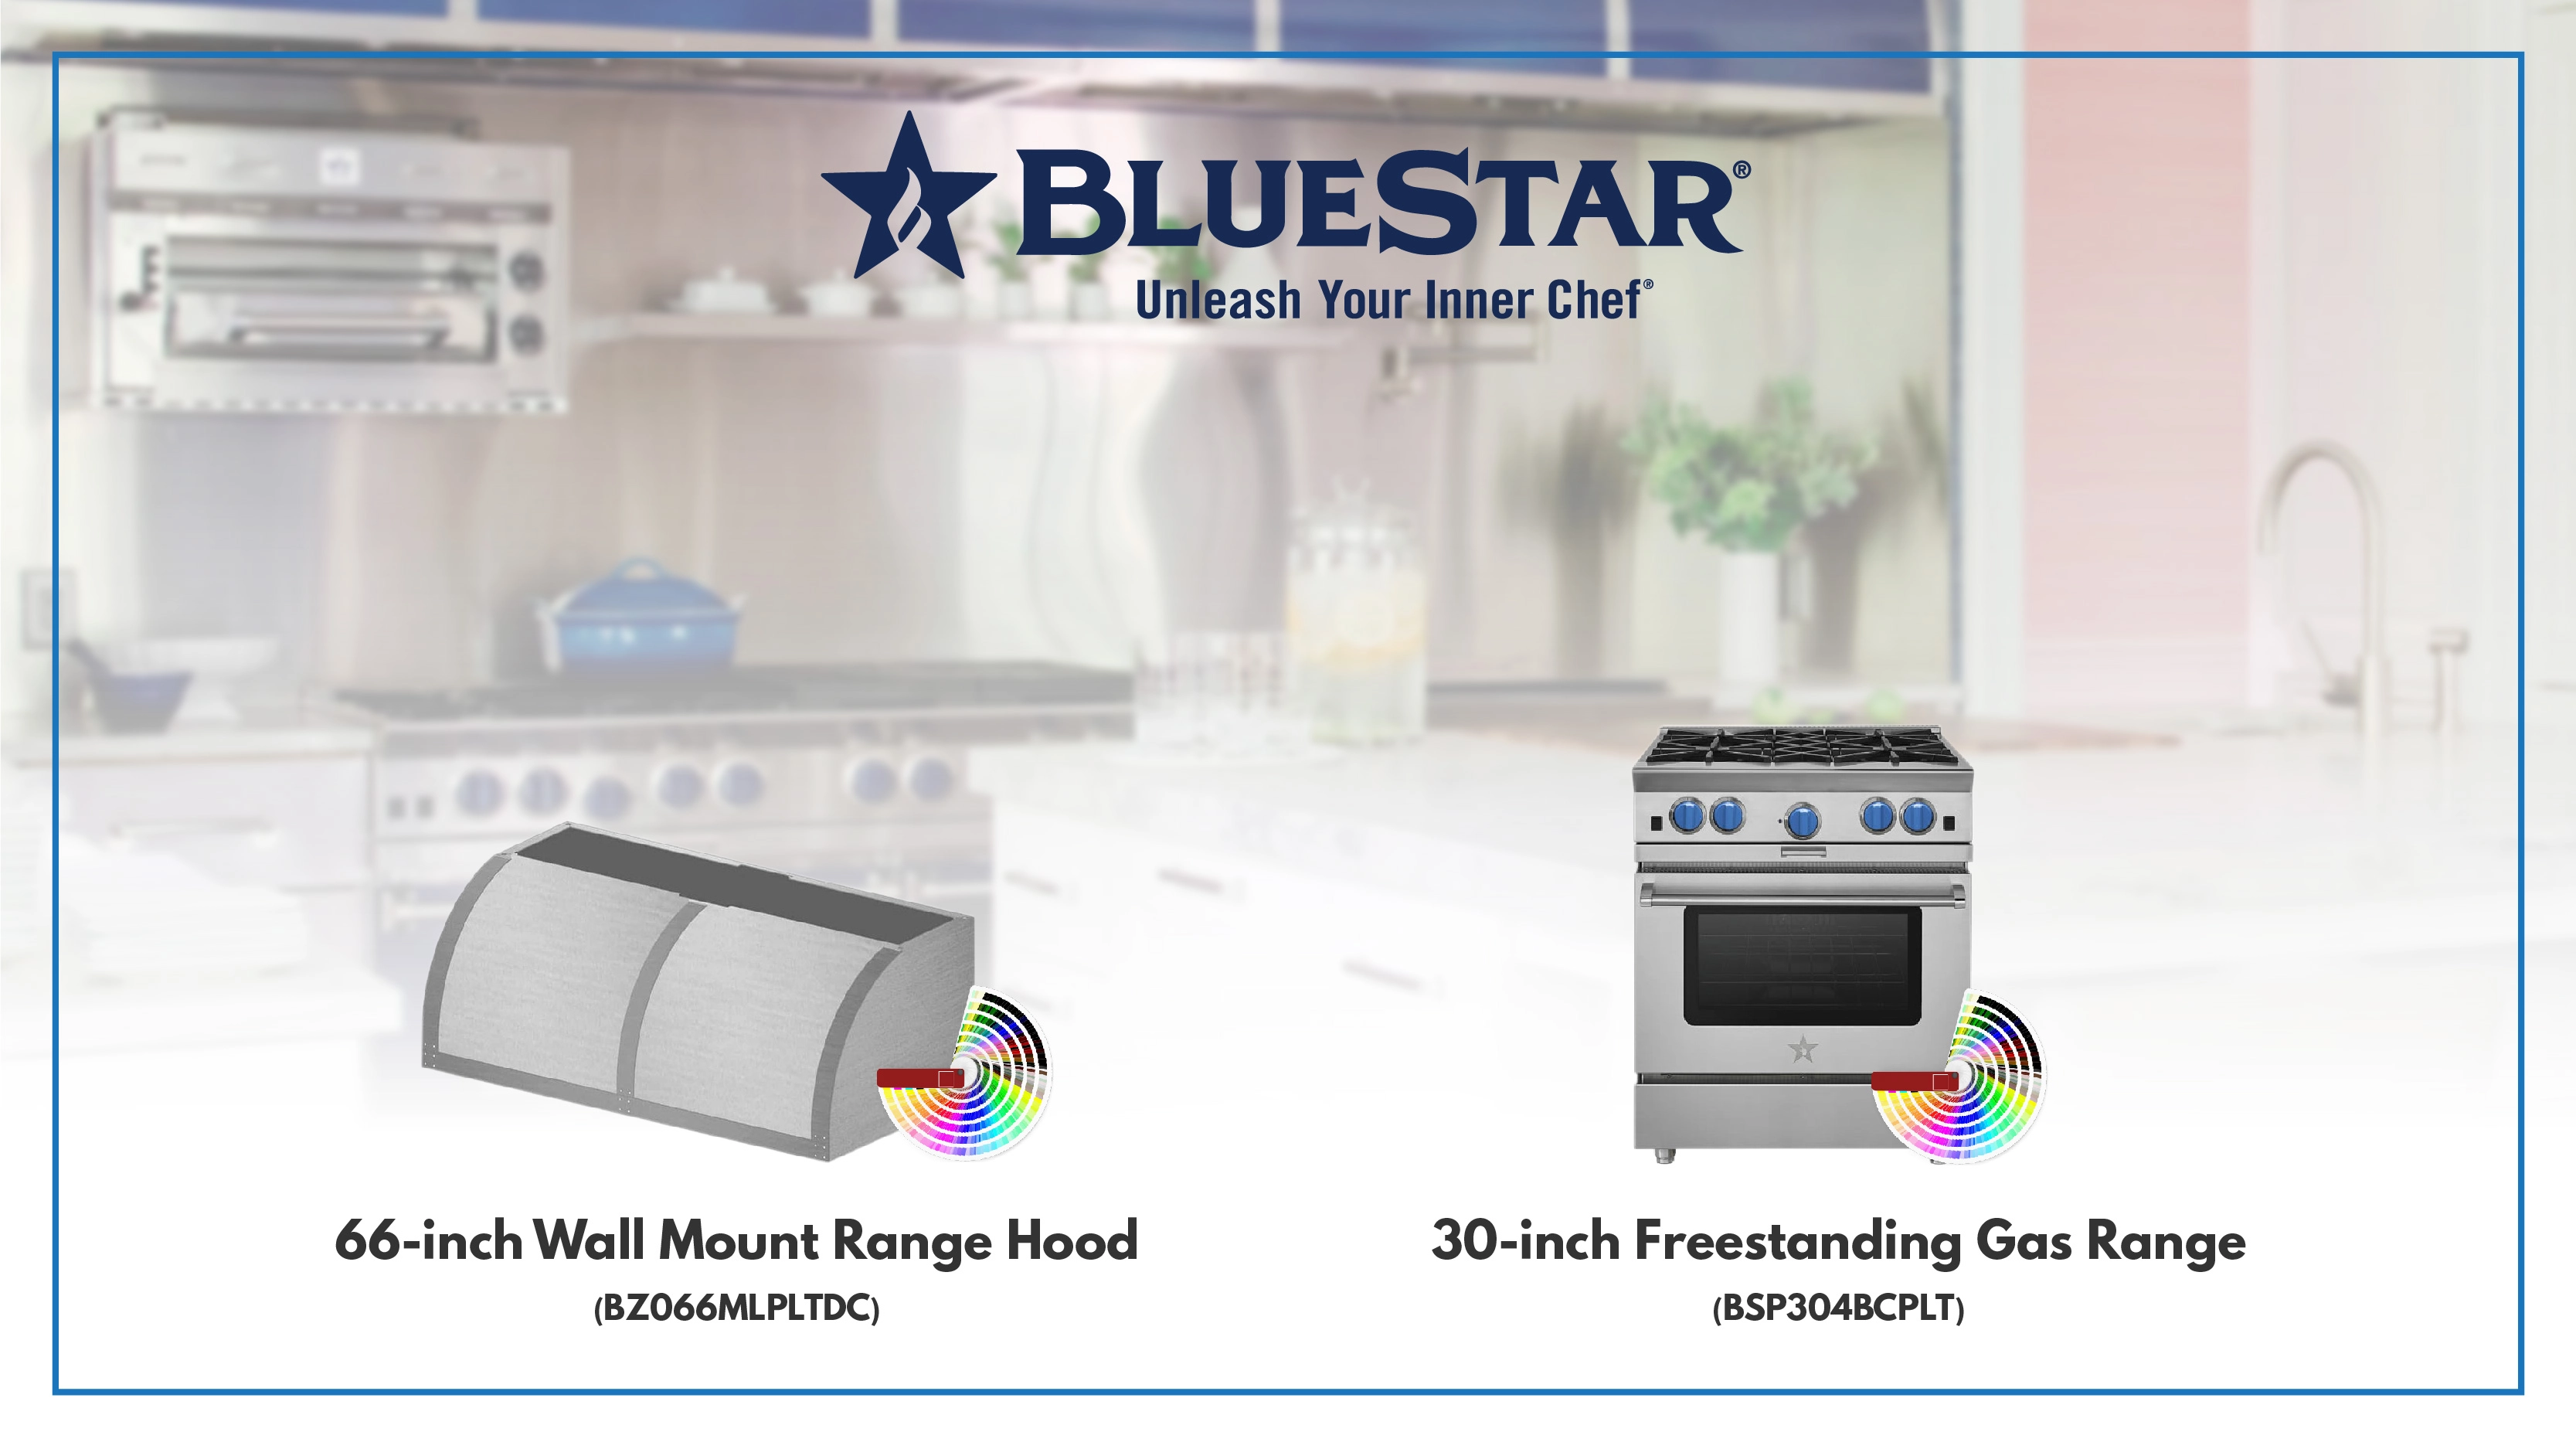 https://d12mivgeuoigbq.cloudfront.net/assets/blog/Fuse%20Specialty%20Appliances/fuse-new-year-new-kitchen-bluestar.webp